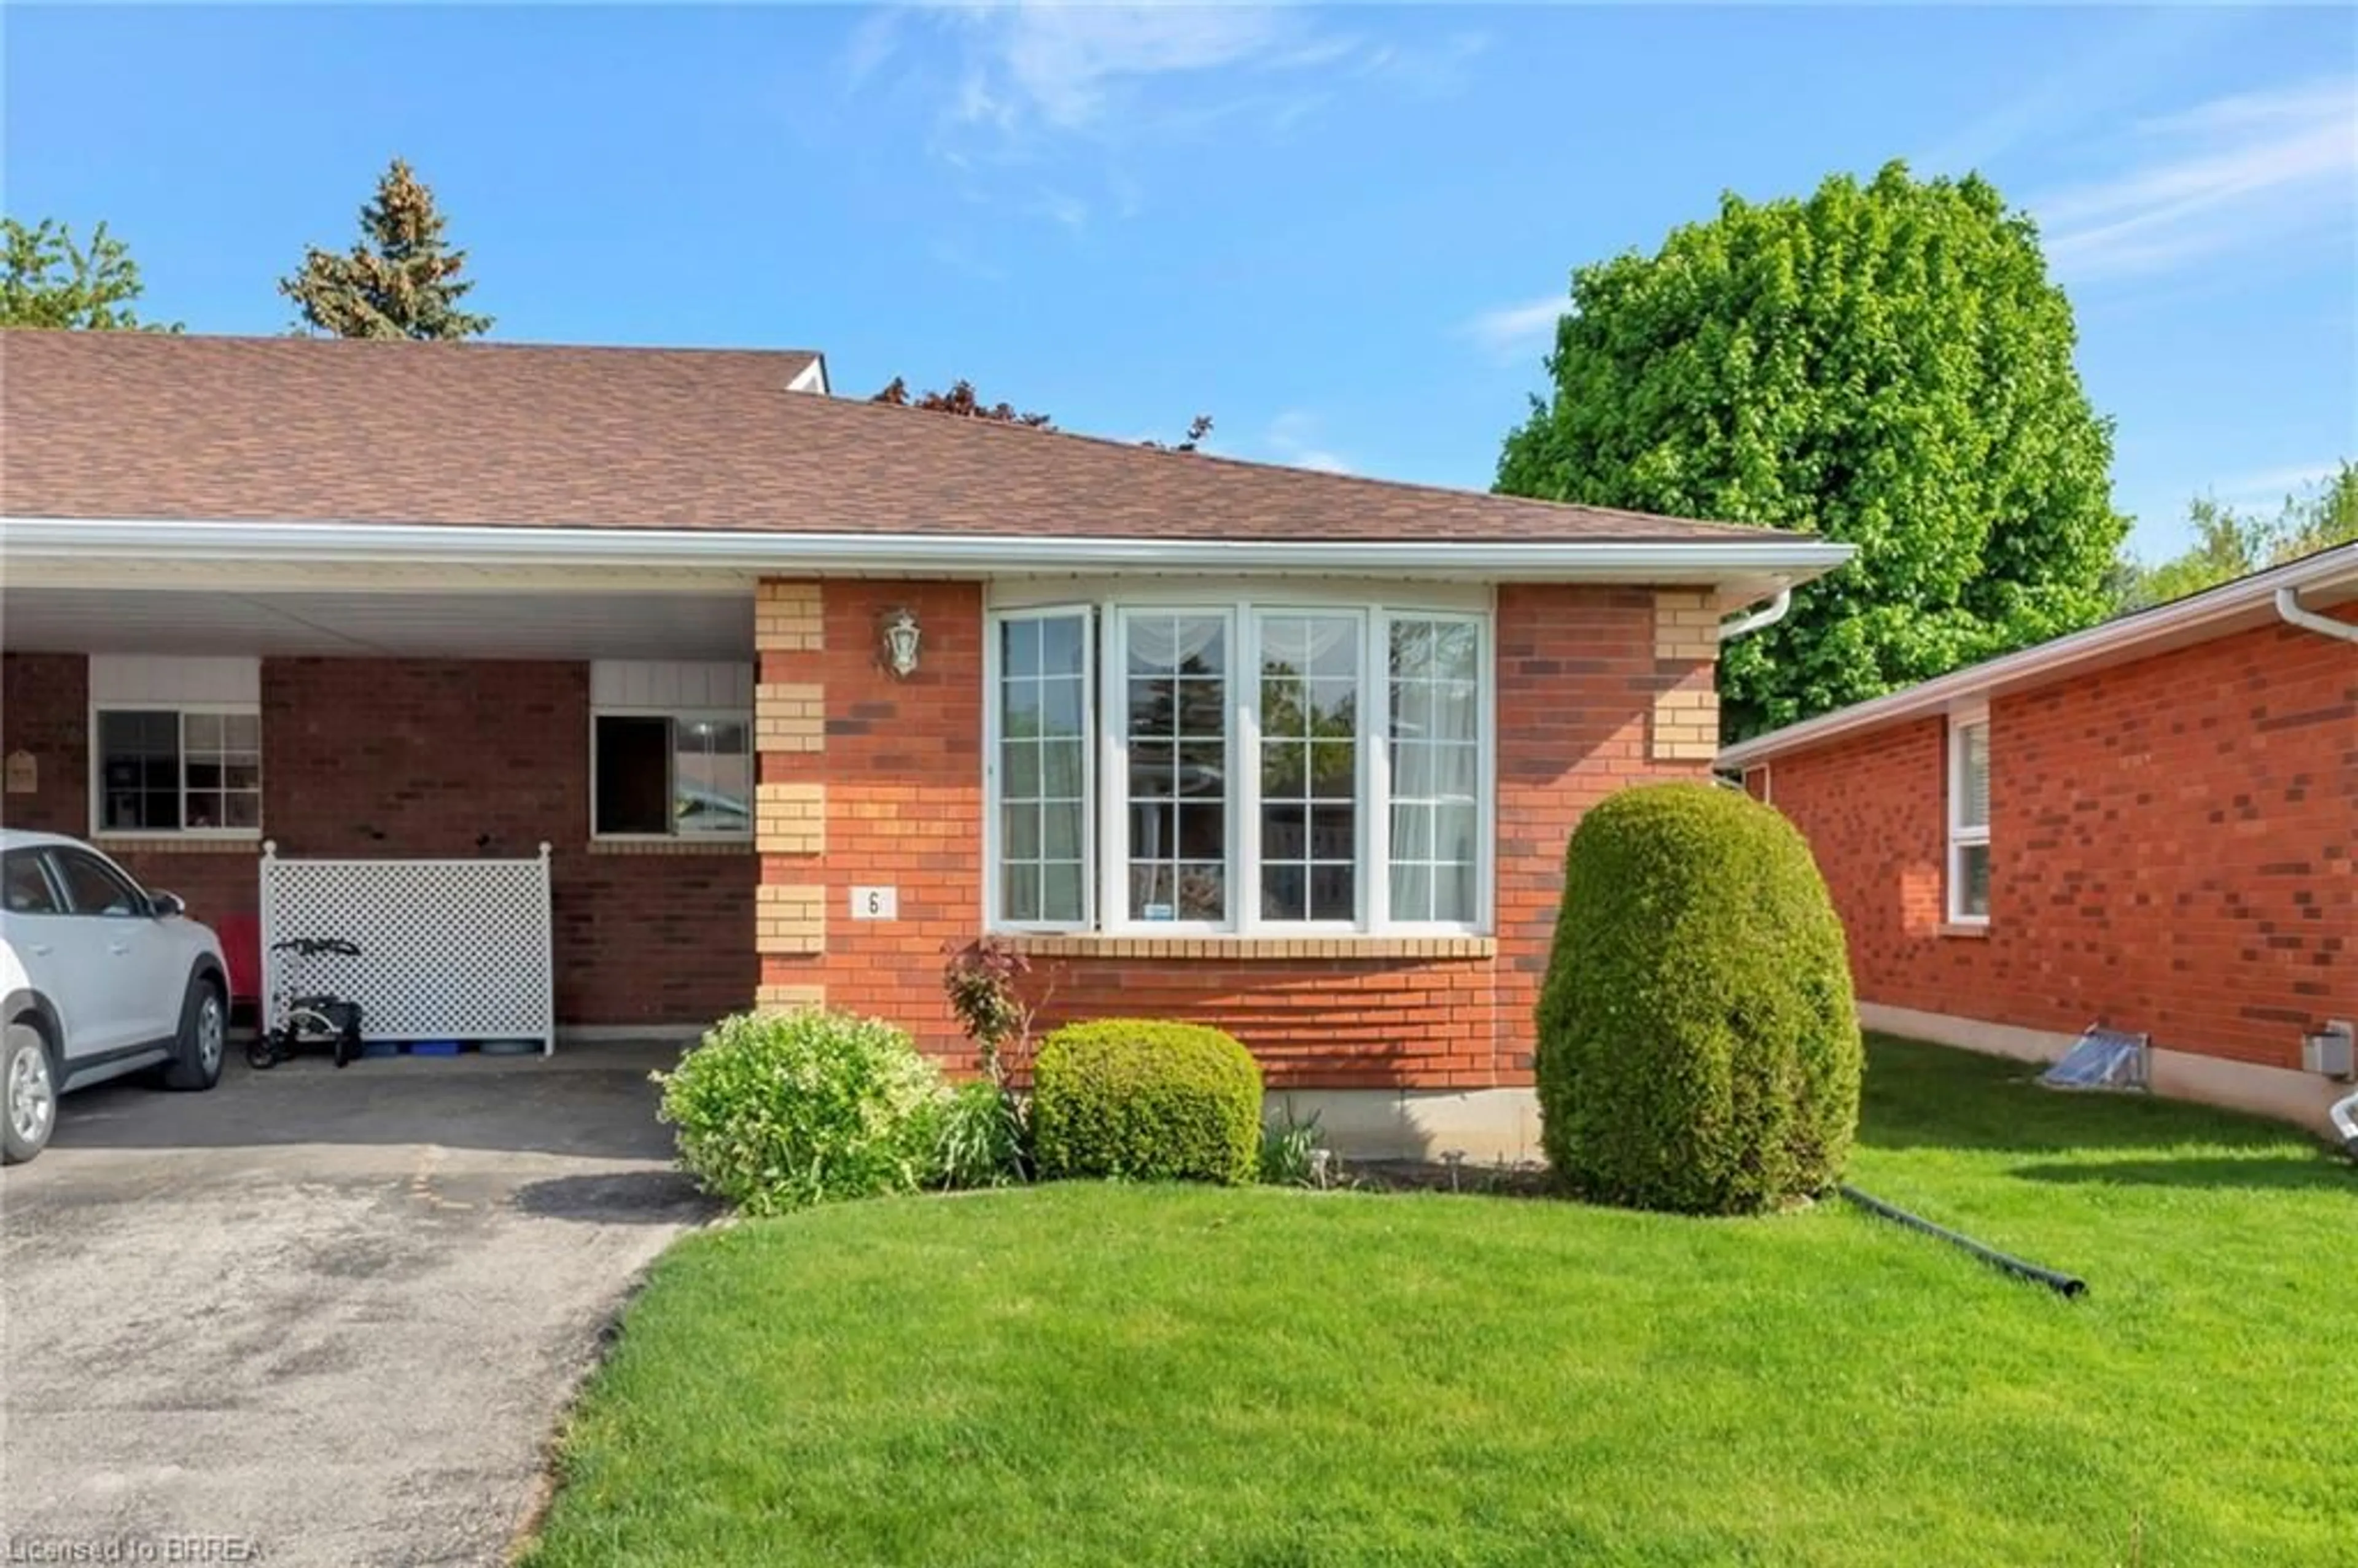 Home with brick exterior material for 20 Courtland Dr #6, Brantford Ontario N3R 7Y2